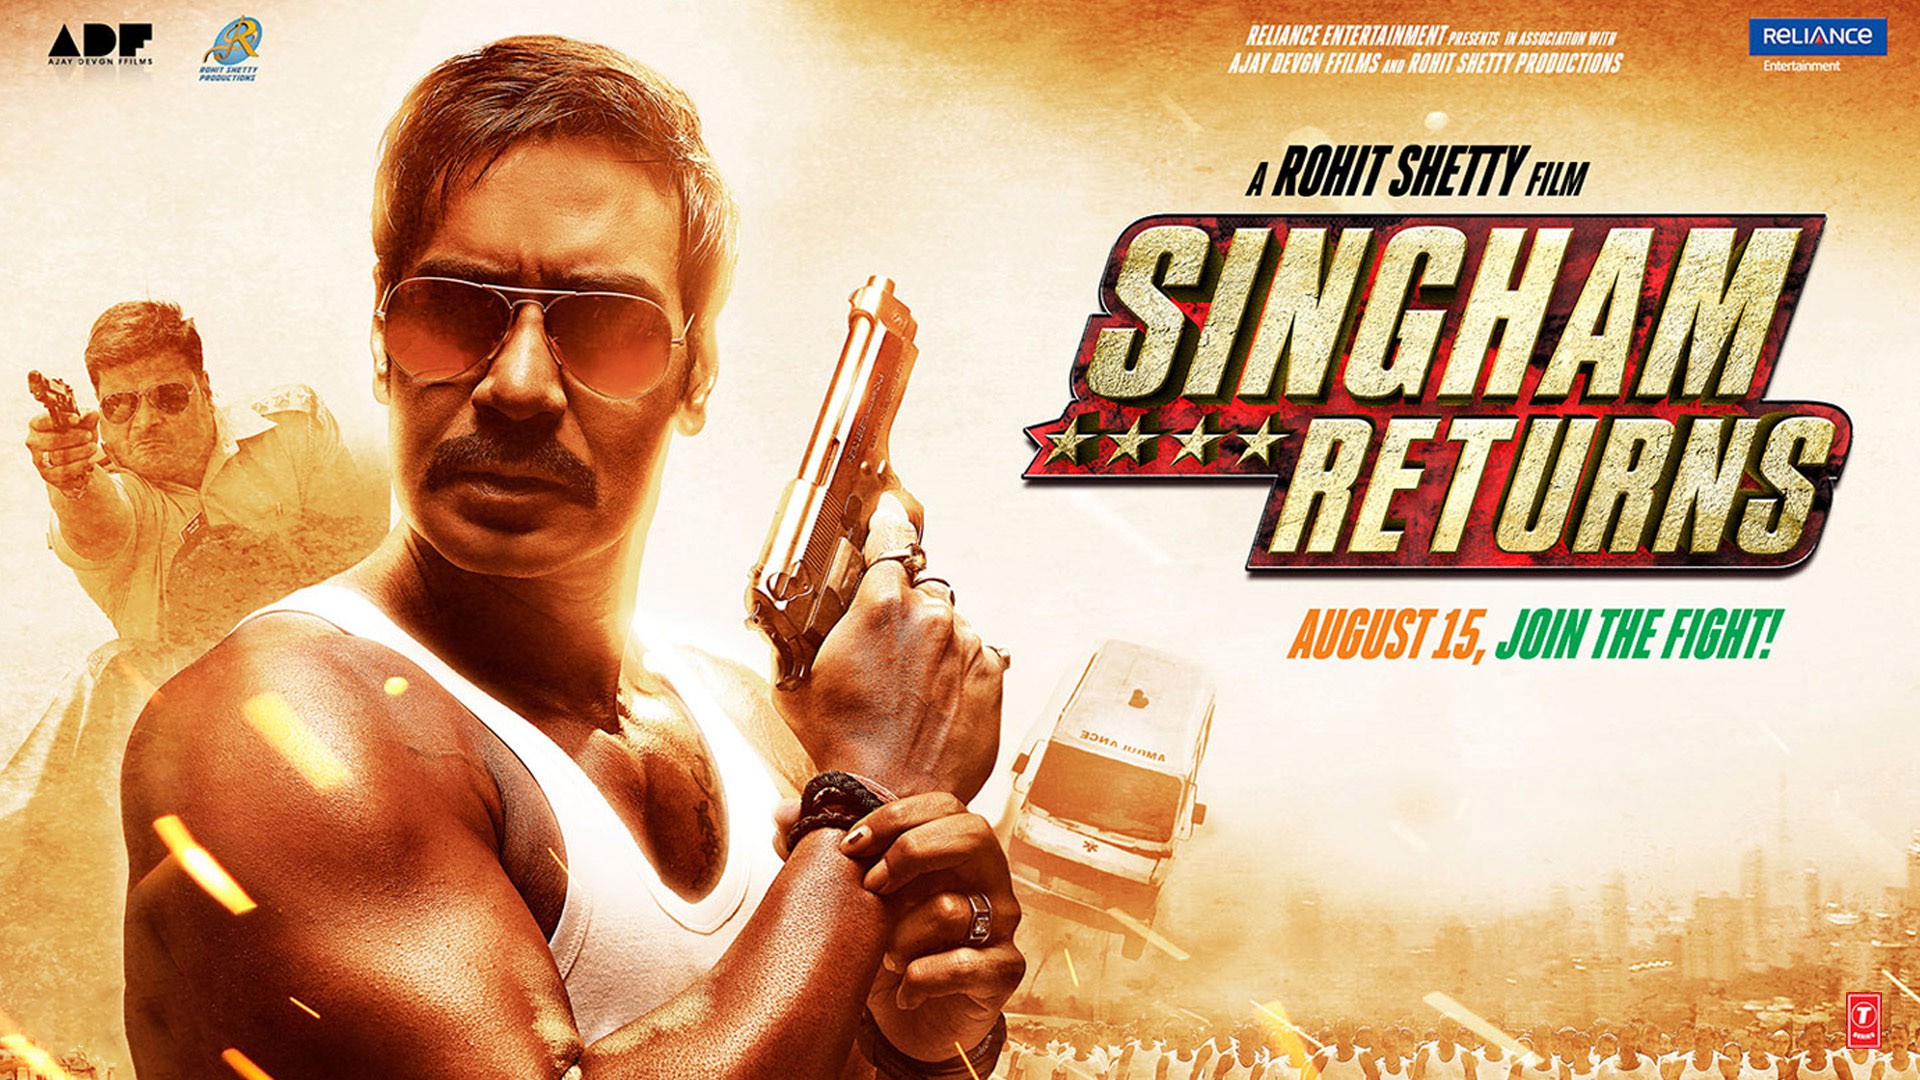 Singham Returns Bollywood Movie Poster Wallpaper - Latest Hindi Movie  Posters - 1920x1080 Wallpaper 